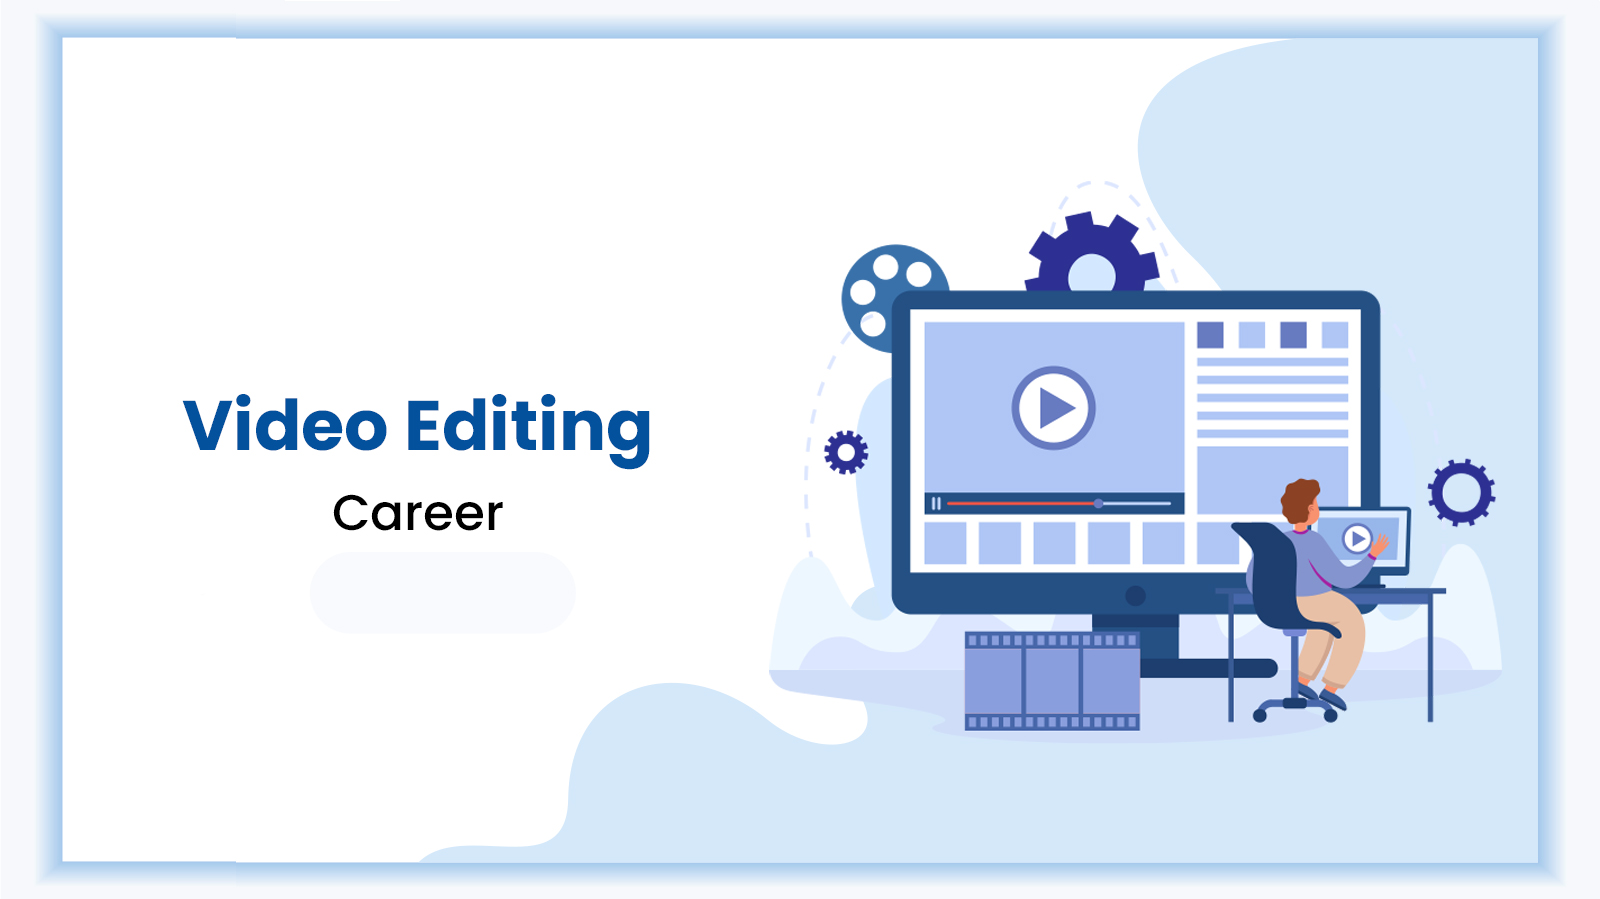 Illustration for Video Editing as a Career